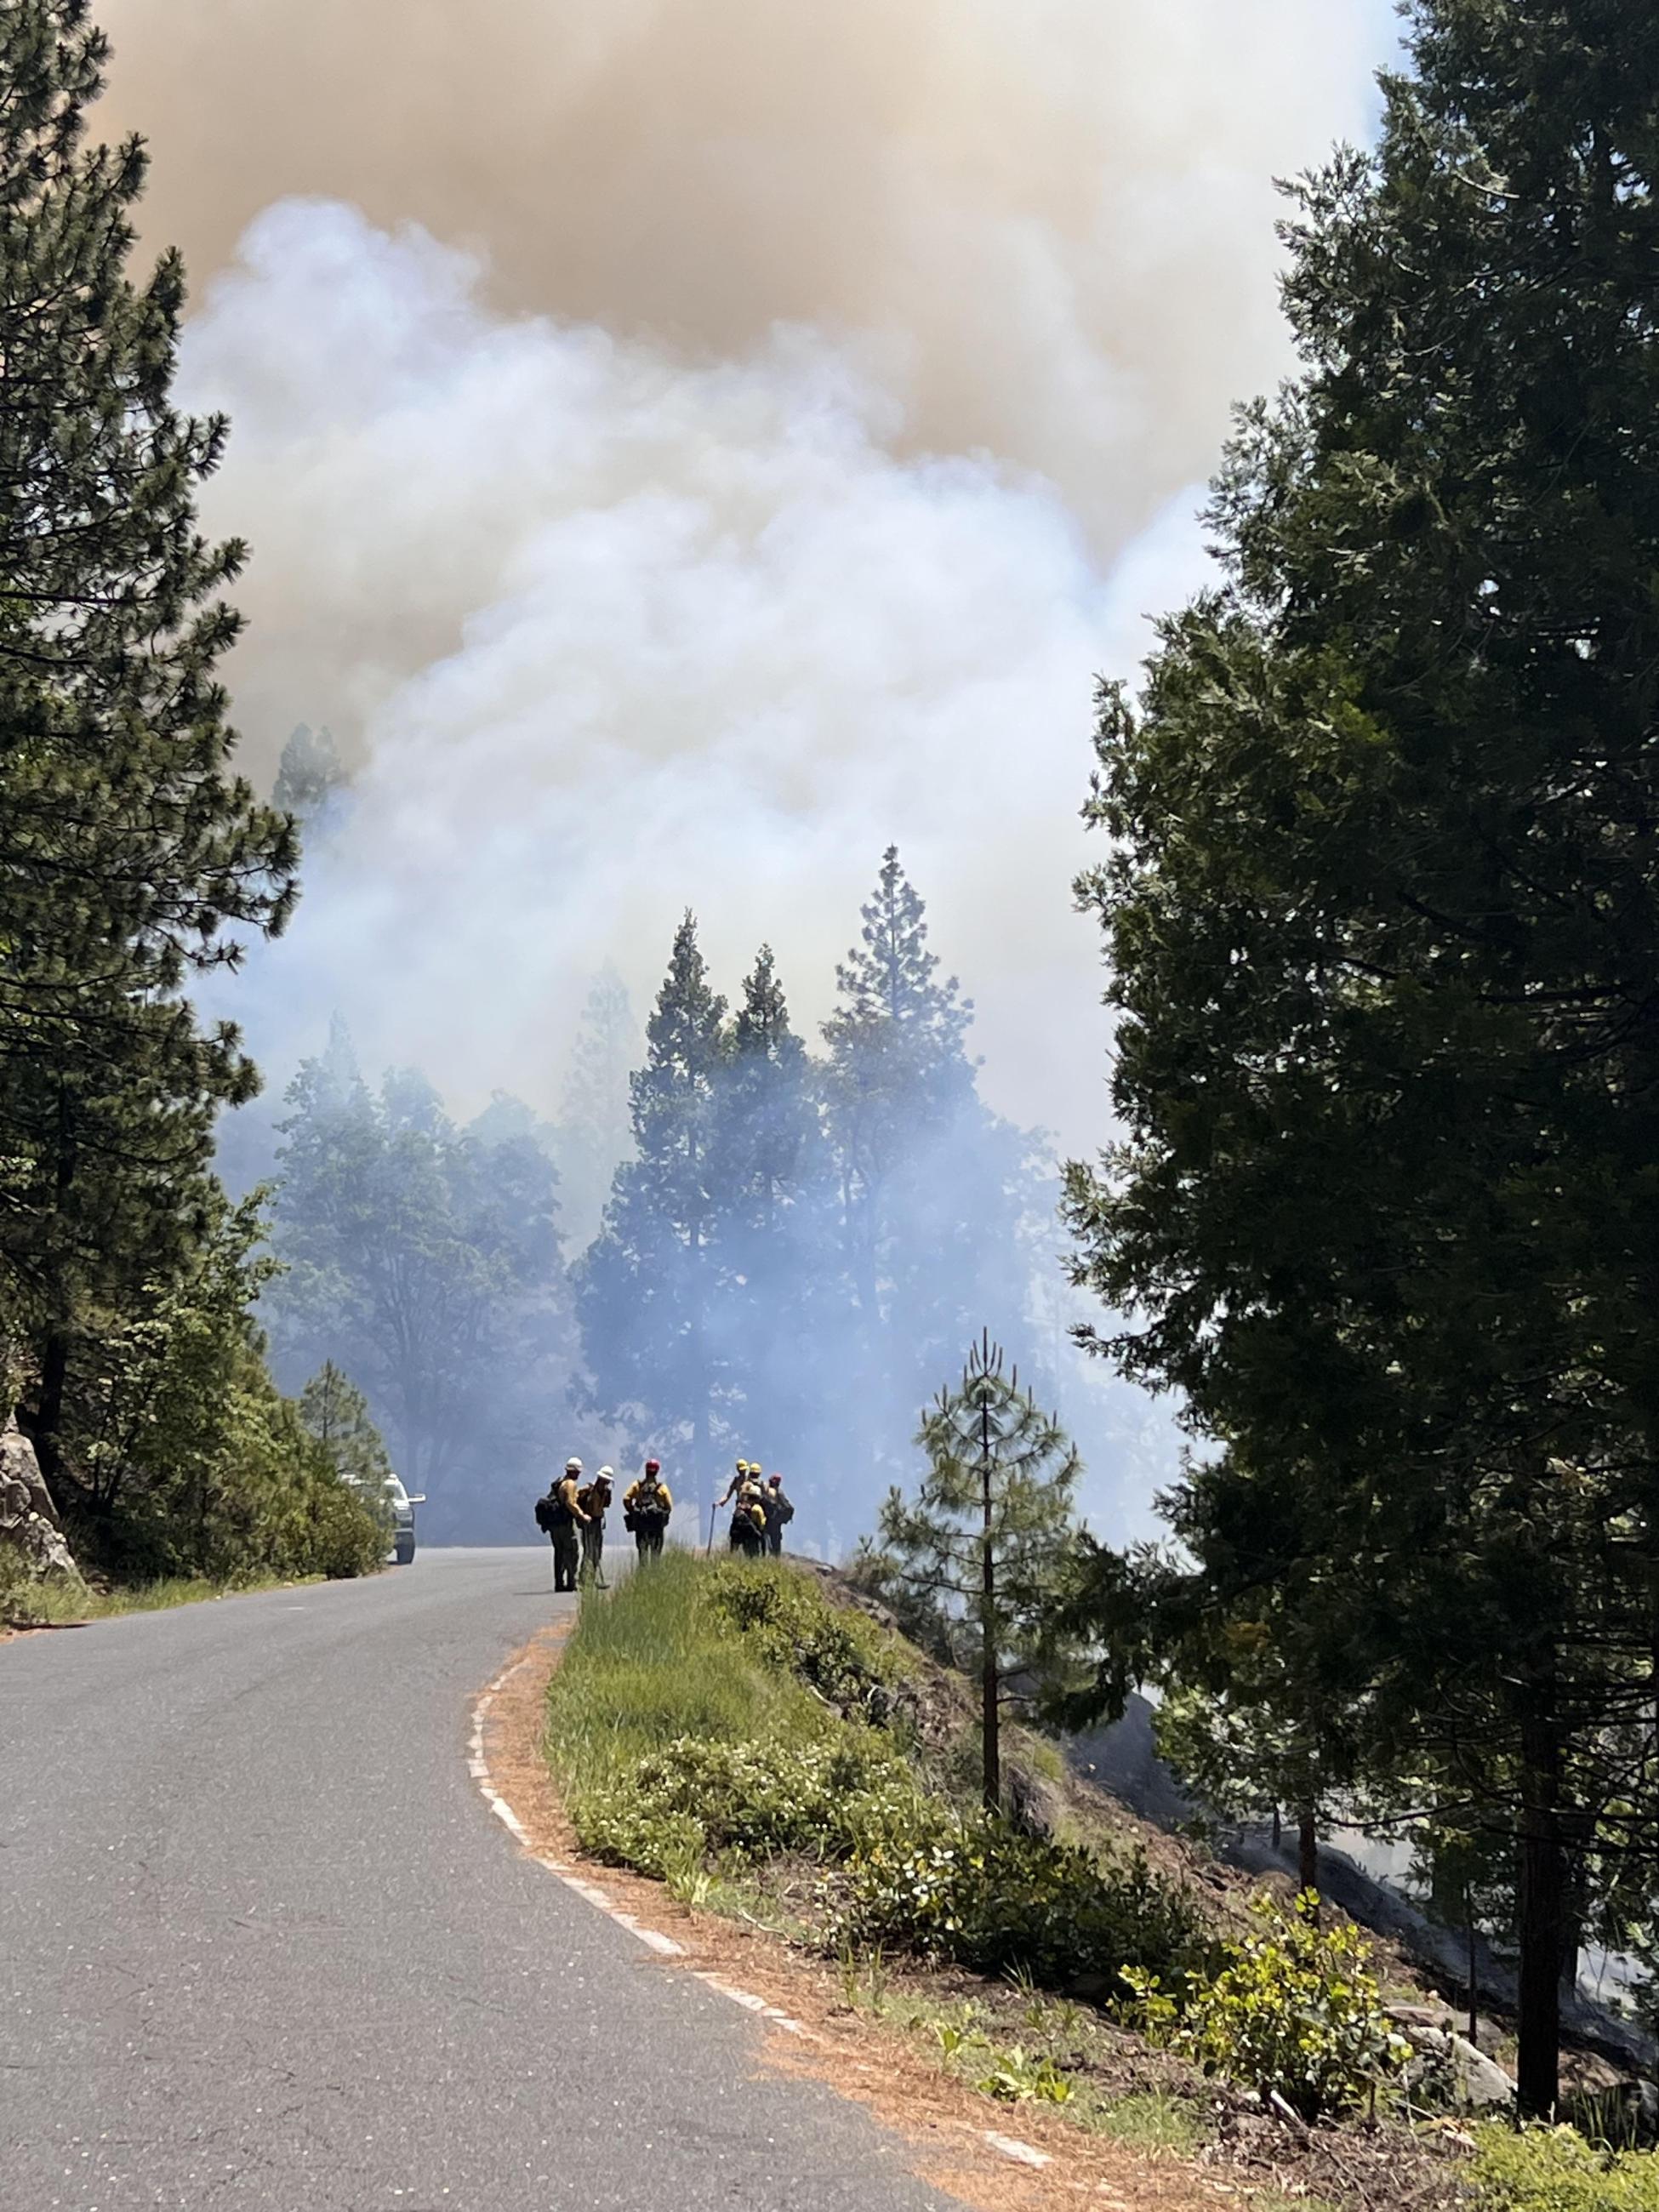 The Crabtree Road closed from Highway 108 to the intersection of Forest Road 4N11/4N26. This closure is to protect the safety of firefighters as well as the public during firing along the road.